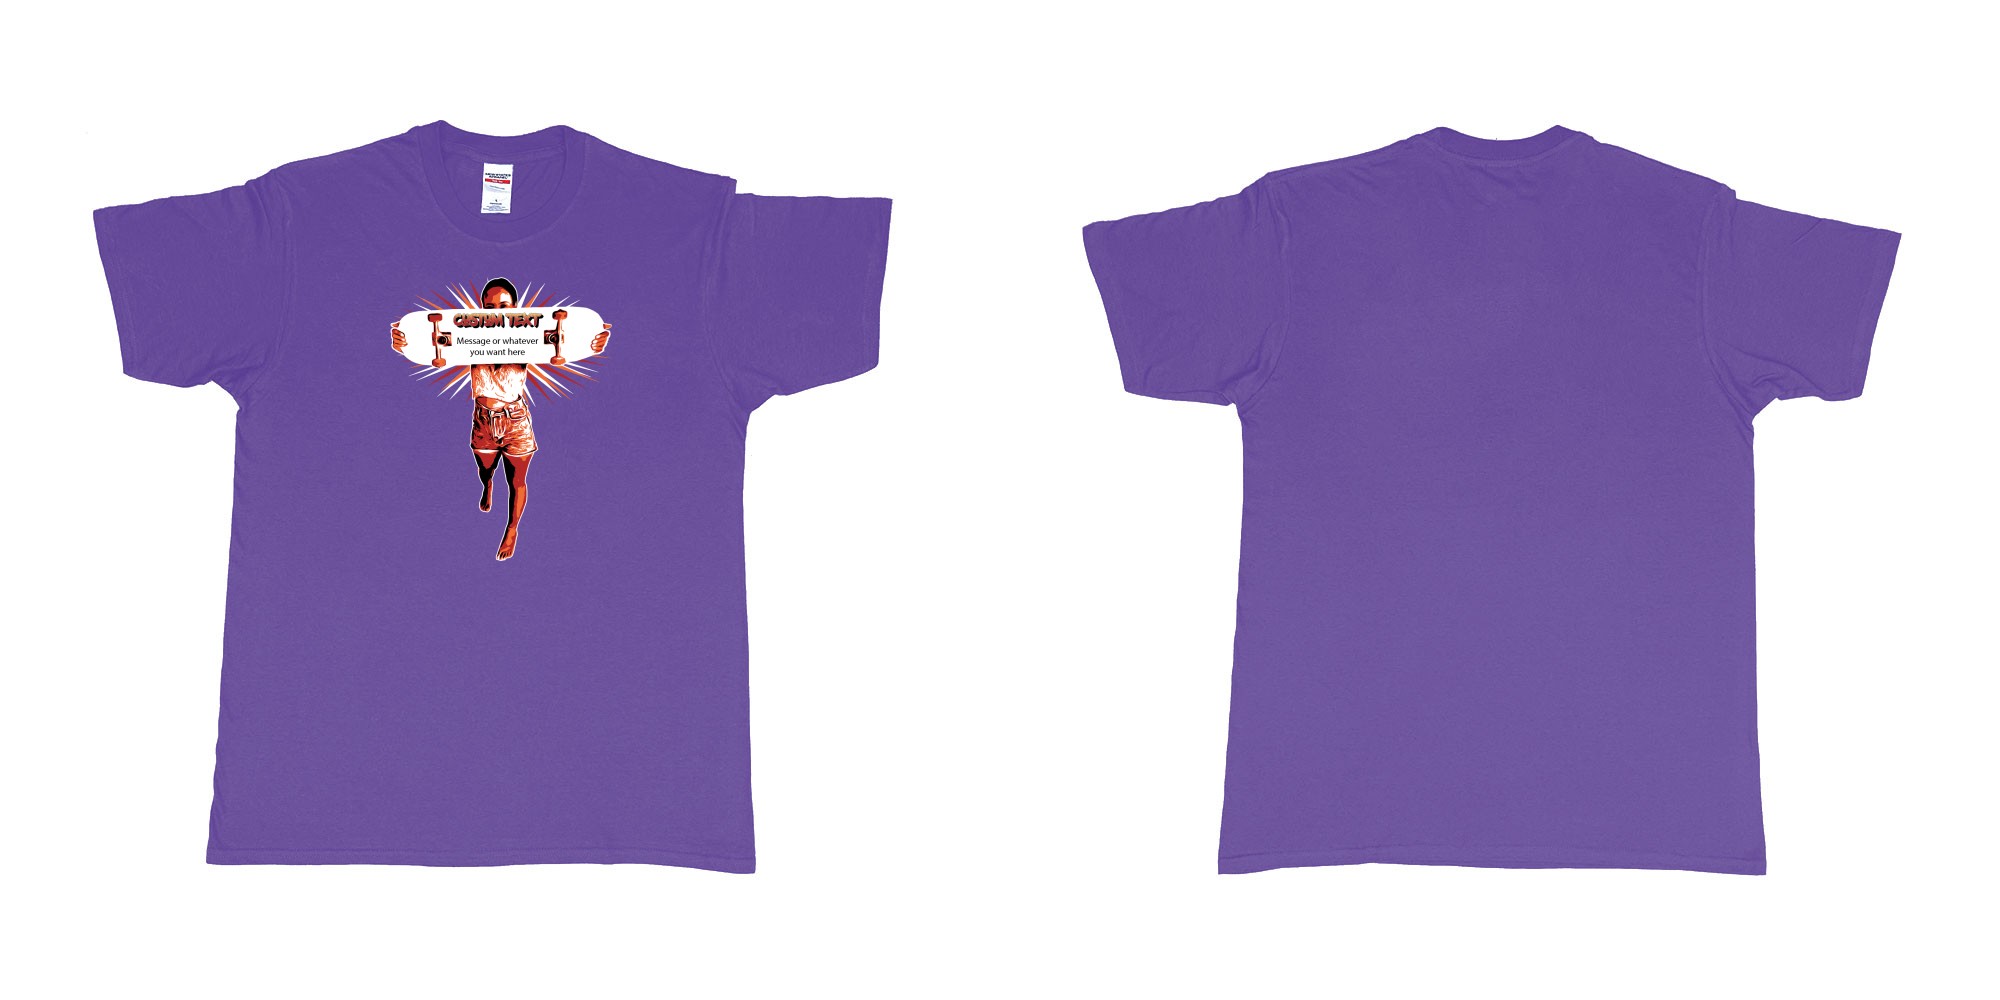 Custom tshirt design girl holding skateboard custom text own message in fabric color purple choice your own text made in Bali by The Pirate Way